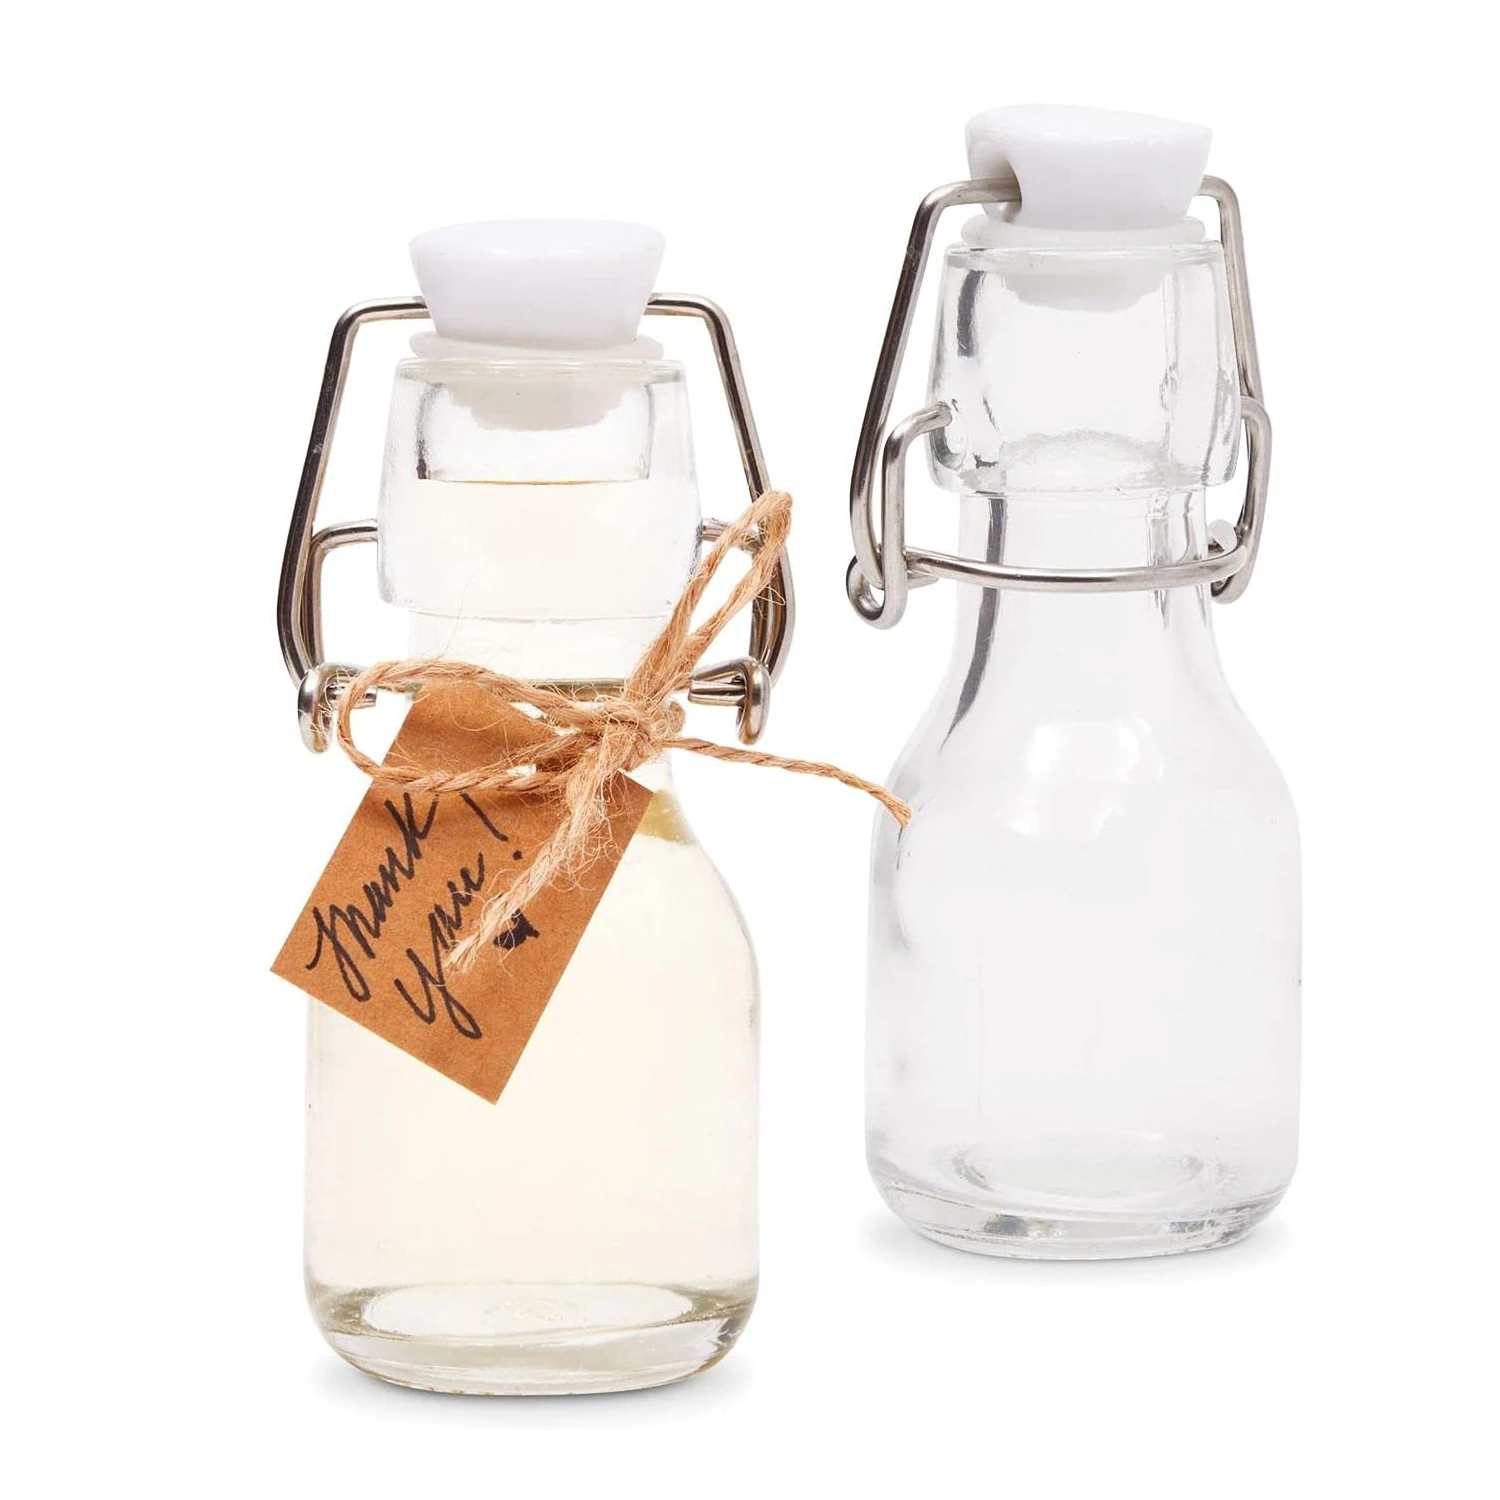 https://ae01.alicdn.com/kf/S936a06364b3e4f6b8cfbfbd3c0d8bf2bu/60ML-Mini-Swing-Top-Glass-Bottles-with-Tags-and-Twine-for-Party-Favors.jpg